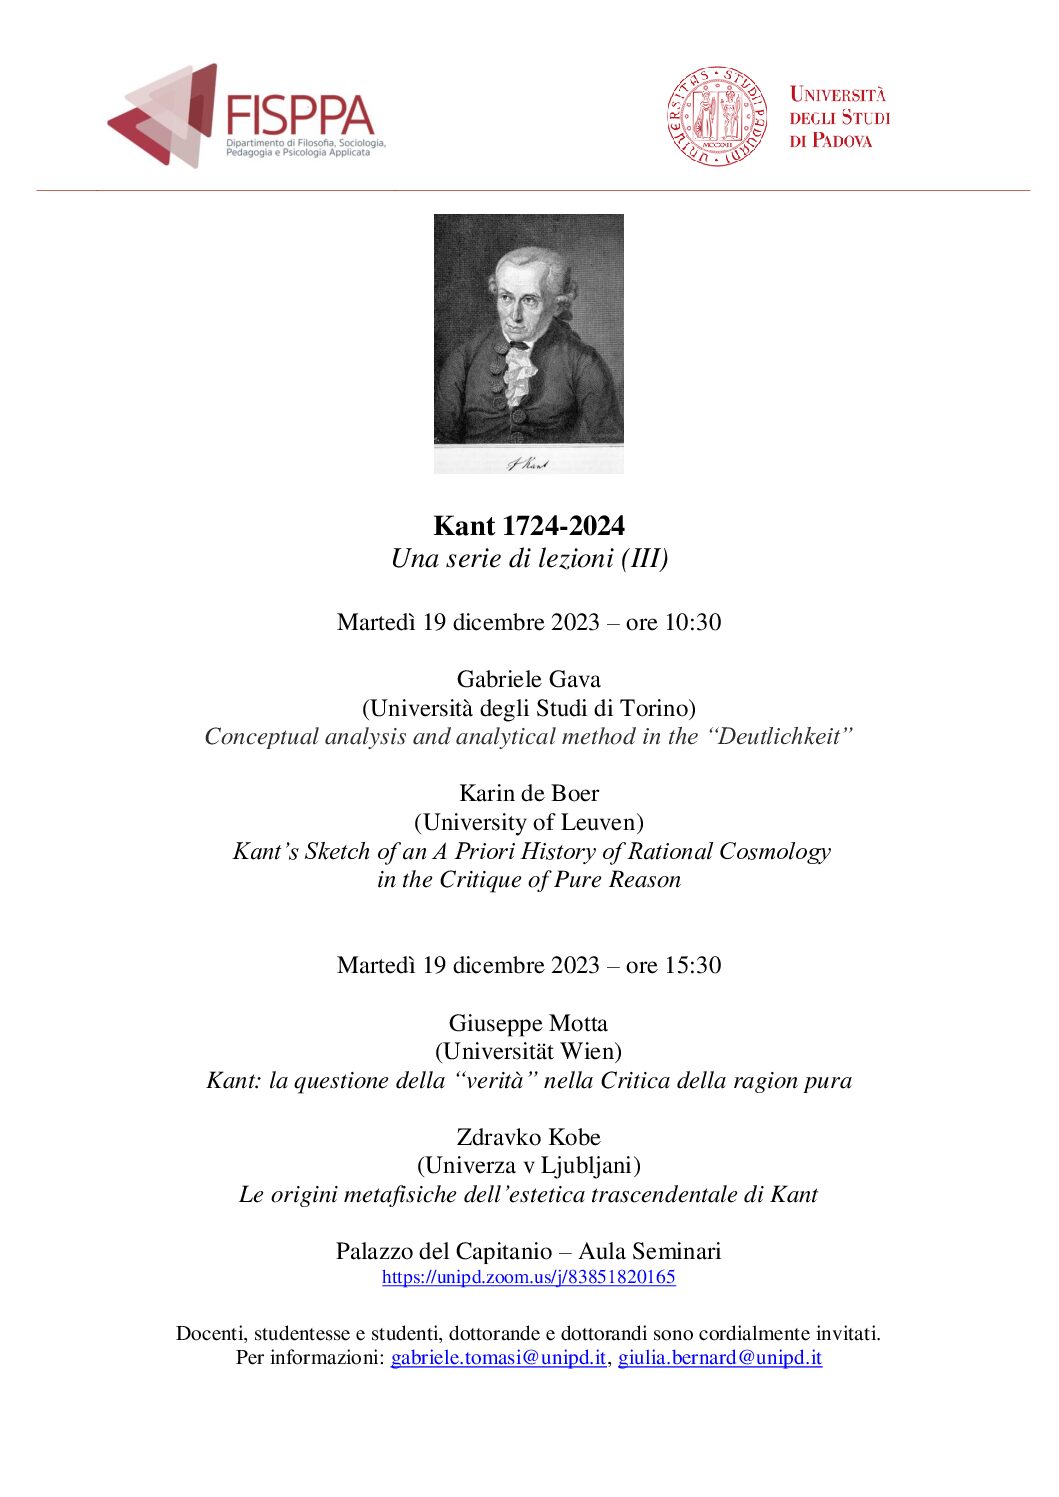 Conference: “Kant 1724-2024: A Series of Lectures, III” (Padova, 19 December 2023)